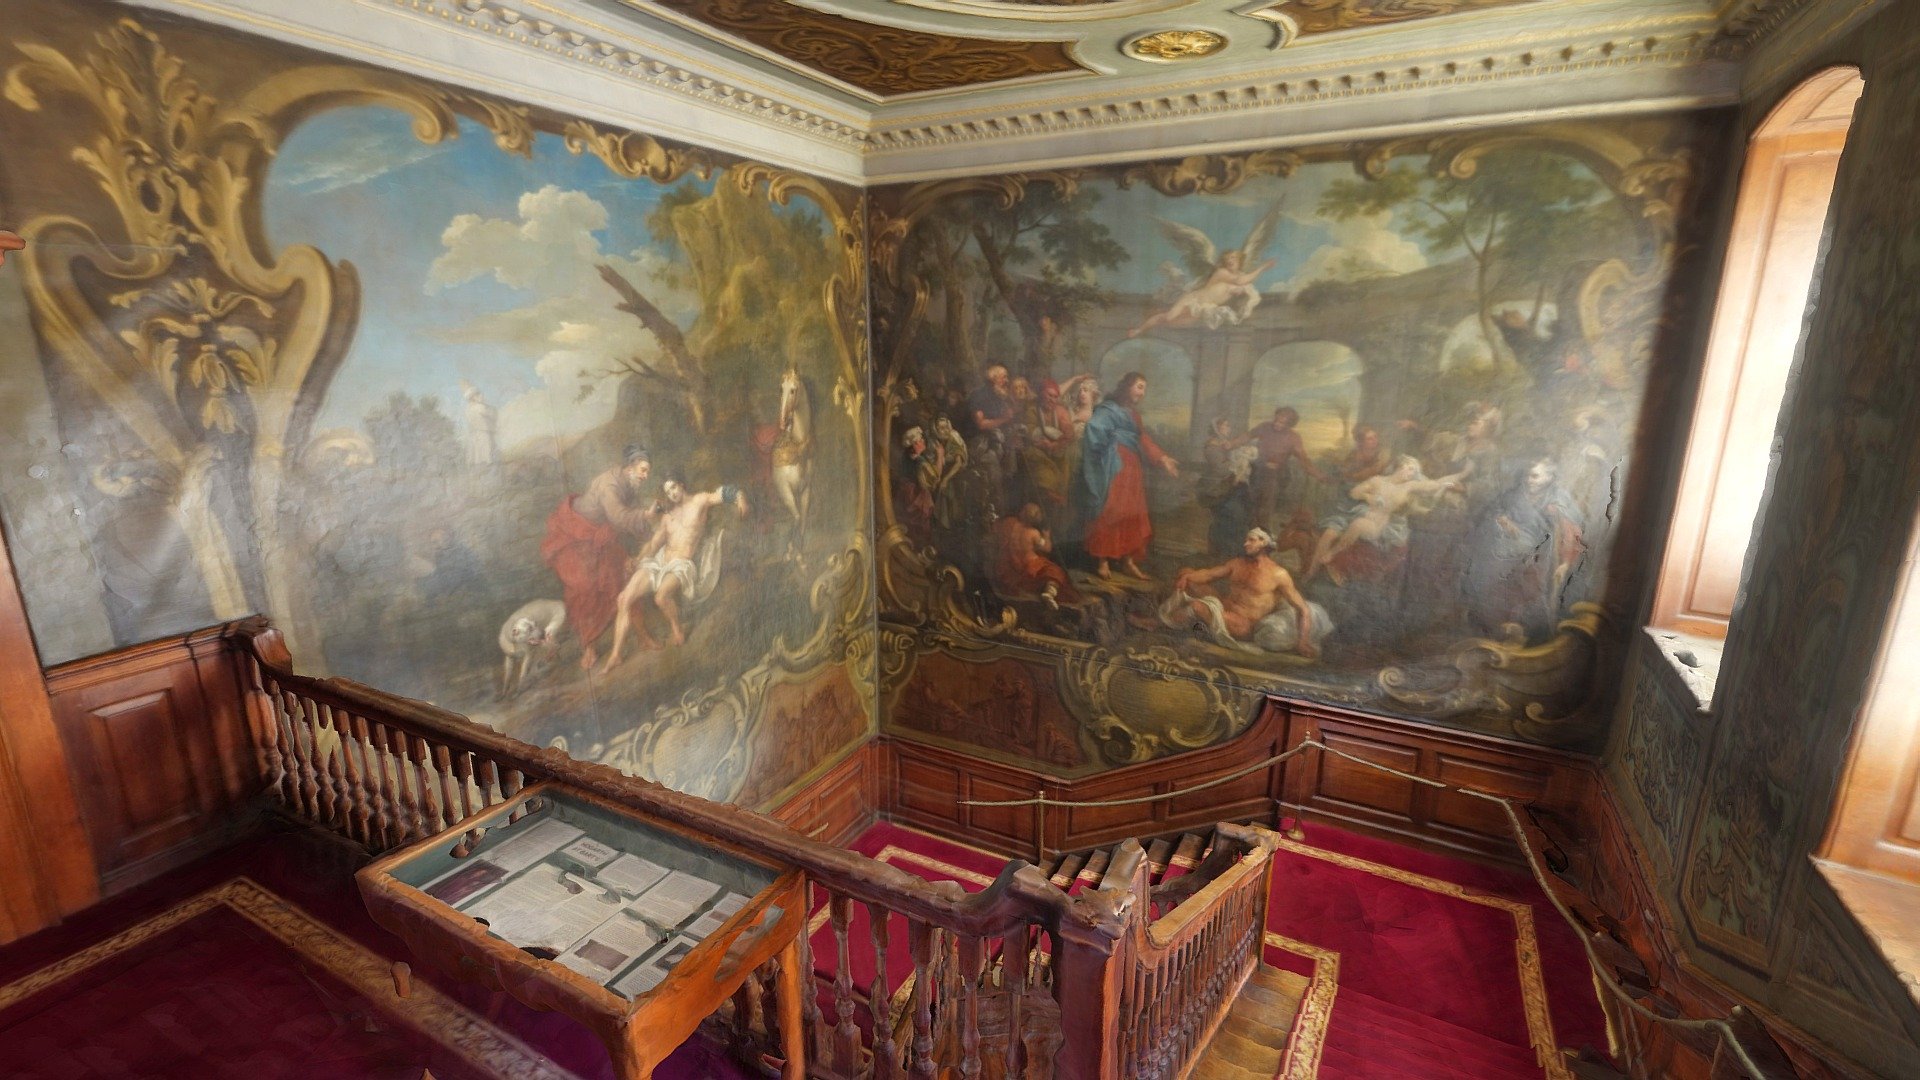 A grand staircase at St Bartholomew’s Hospital, Smithfield, London. The walls are decorated with paintings by William Hogarth (1697-1764).

The paintings depict The Pool of Bethesda and The Good Samaritan.

https://bartsheritage.org.uk/restoring-historic-barts/buildings/ 

The staircase can be visited through the hospital museum which is usually open on Wednesdays.

661 photos taken in September 2021 with a Sony a7R III and processed in Agisoft Metashape.
The model is a bit messy due to the refective wooden surfaces and bright lighting through the windows. It has therefore been heavily cleaned up around the banisters and windows 3d model